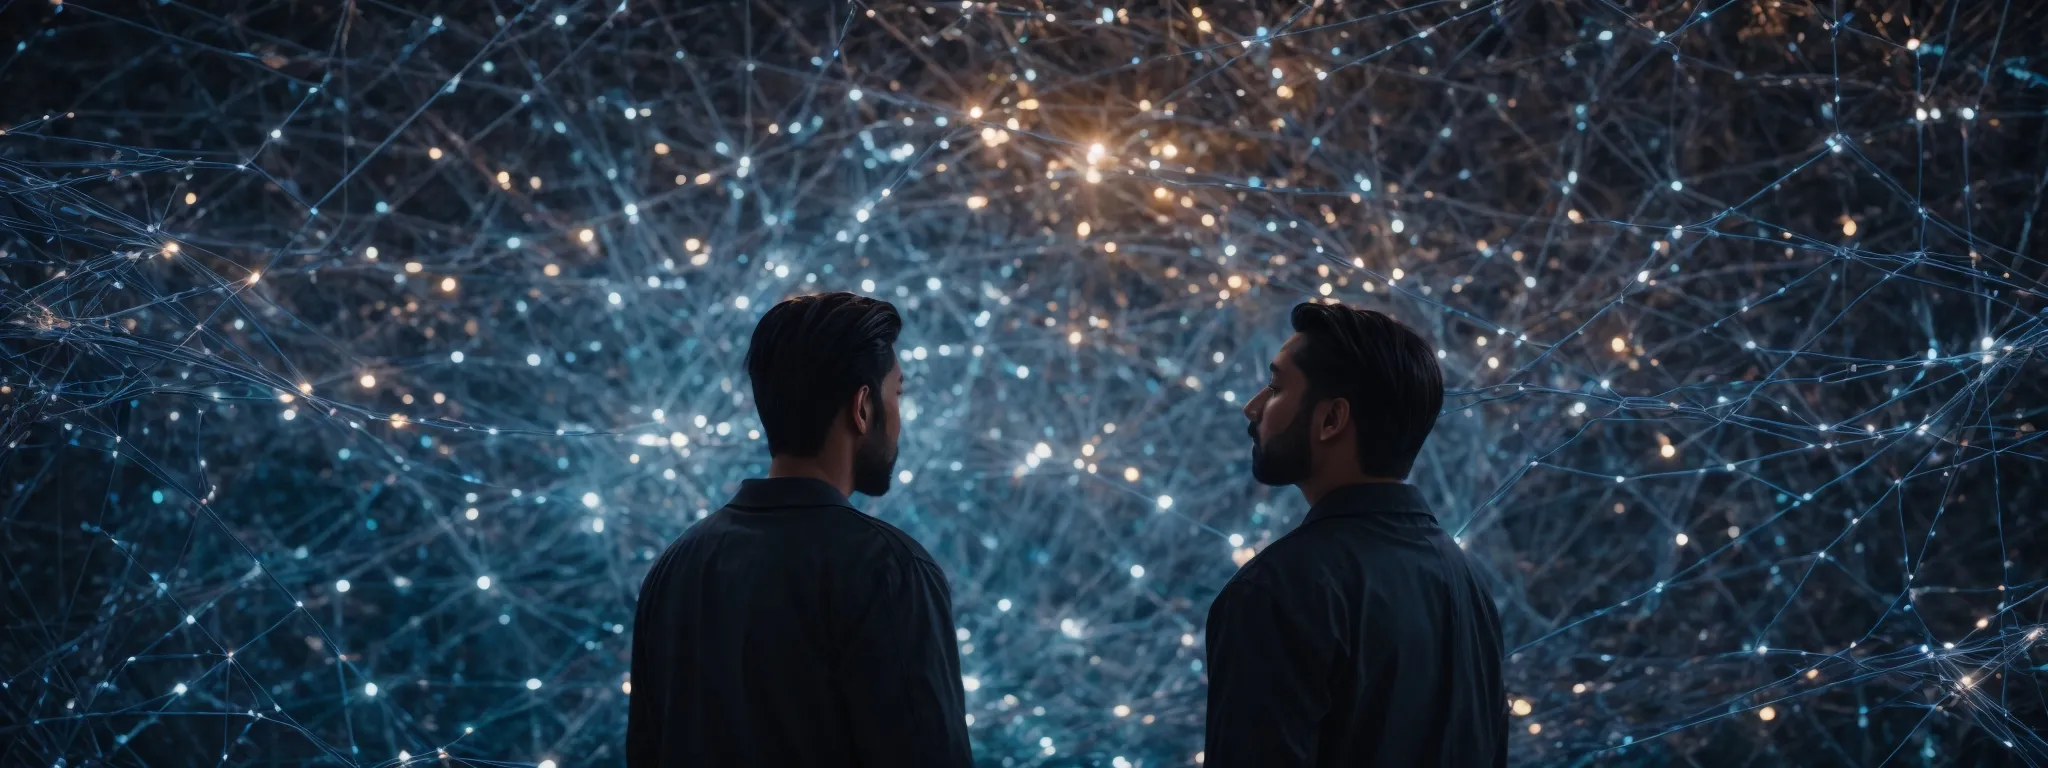 a visionary digital marketer gazes at a sprawling network of glowing connections representing the digital marketing landscape of the future.